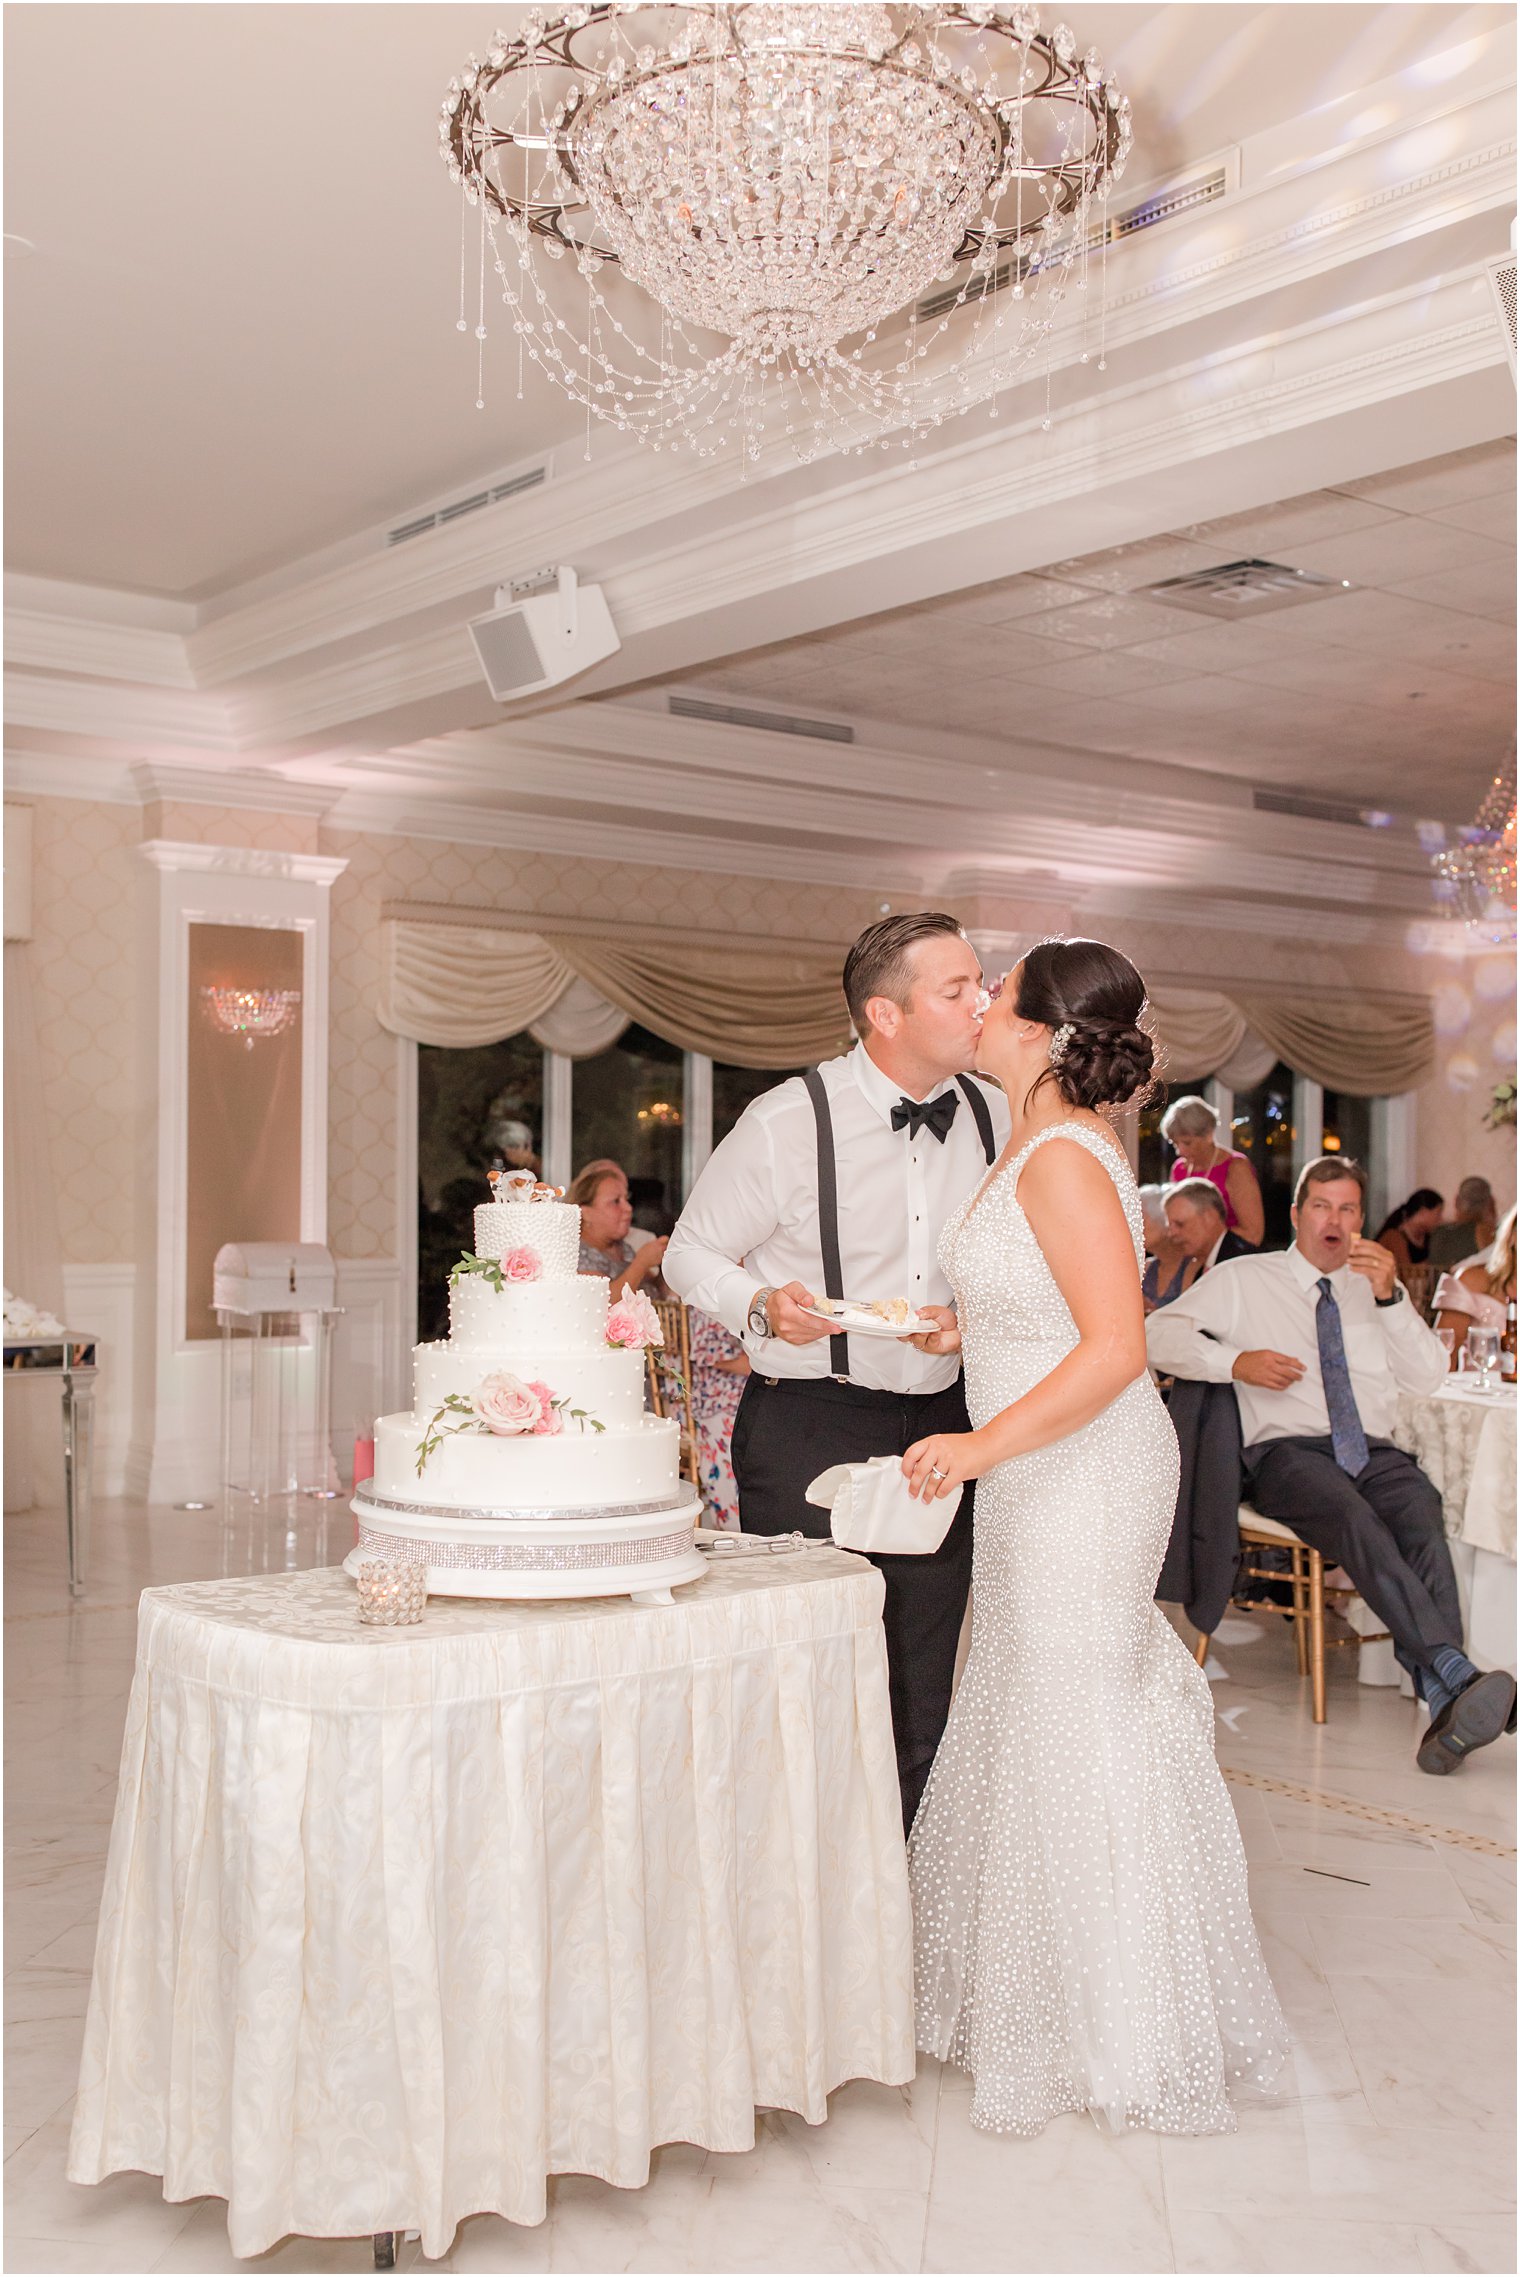 newlyweds kiss during cake cutting photographed by Ocean Township NJ wedding photographer